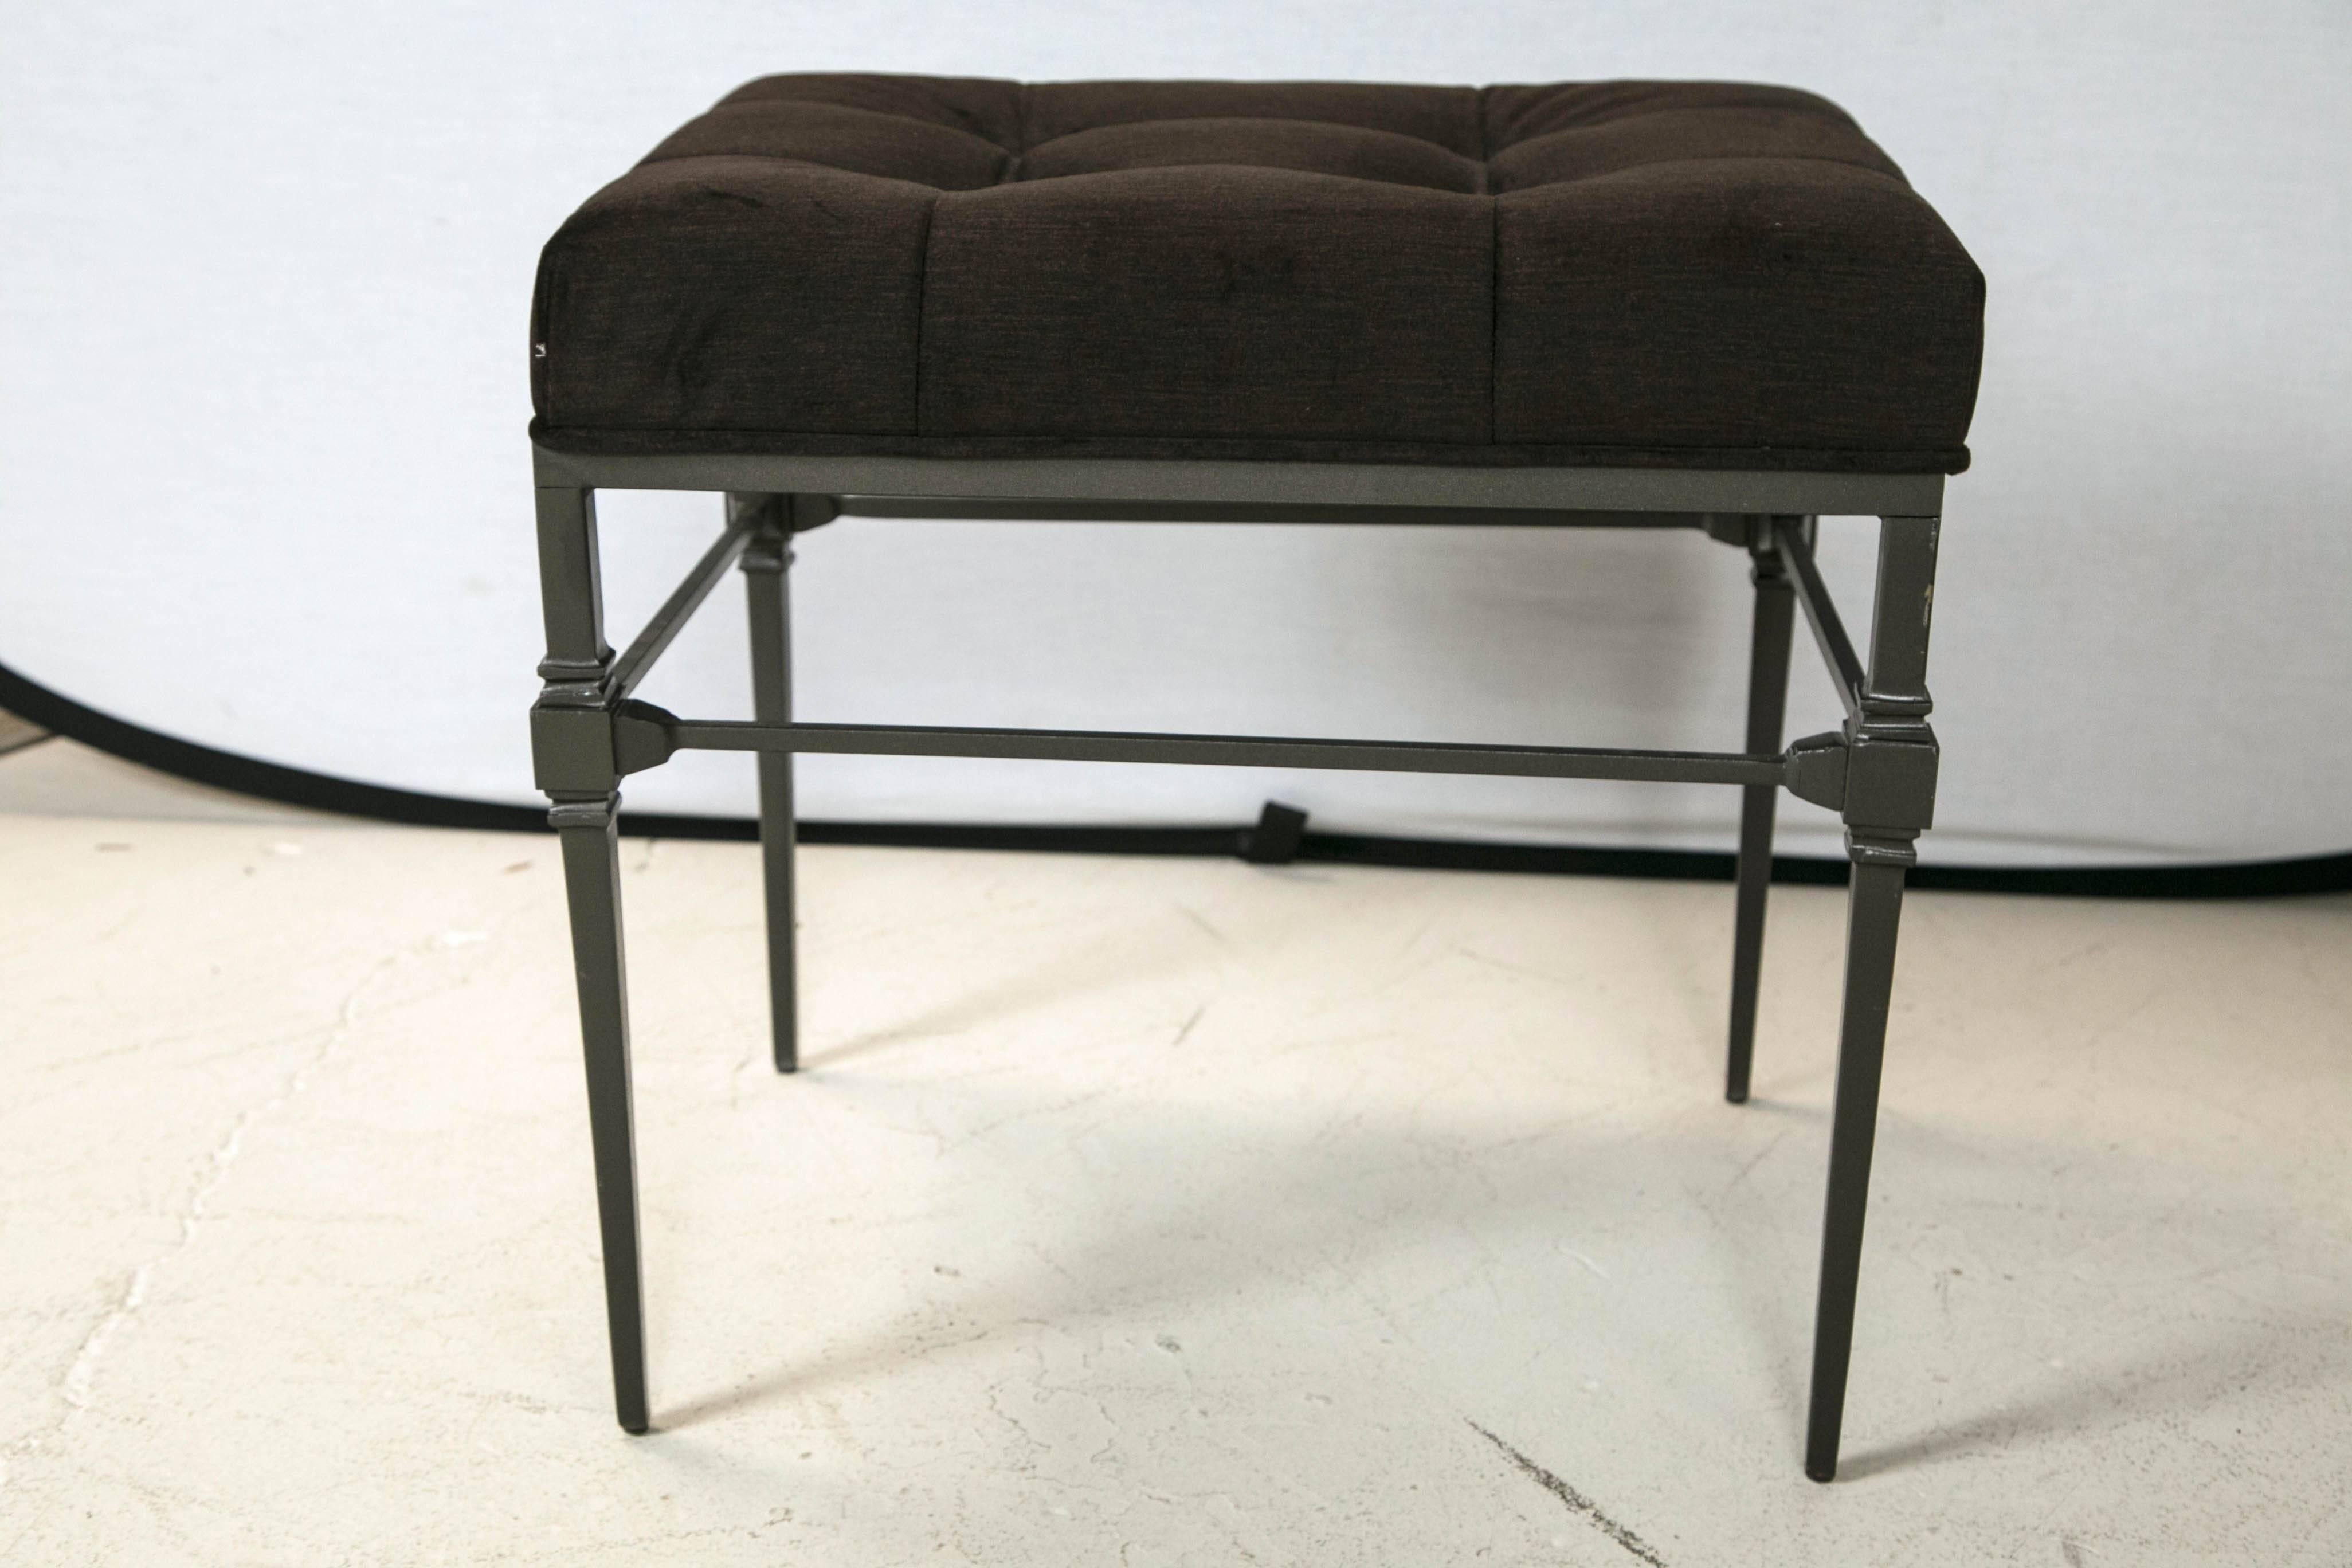 Pair of wrought iron benches or stools in the neoclassical style. Tufted seats in dark brown velveteen.